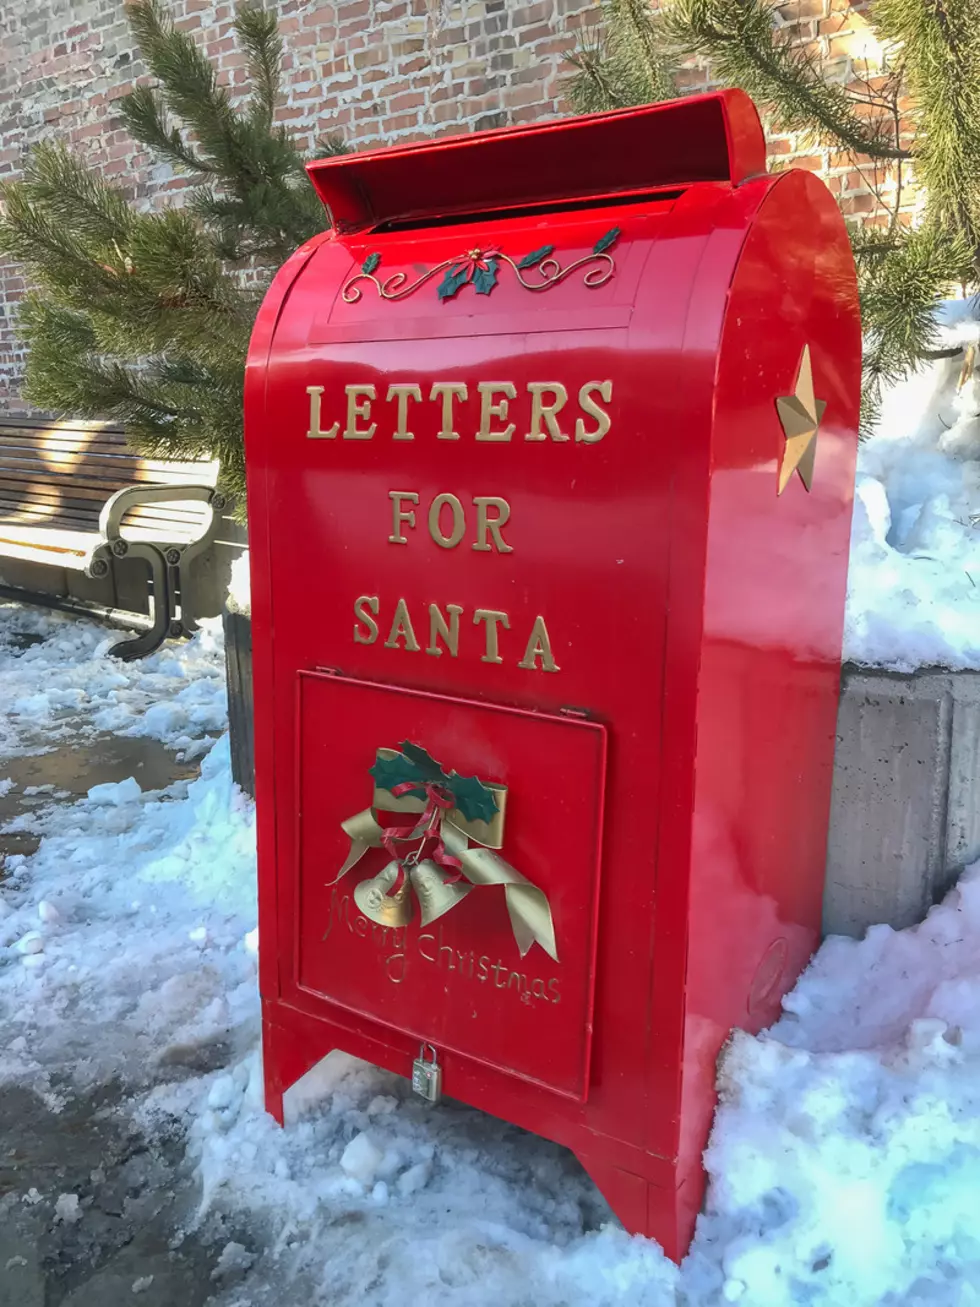 Local Man Continues Tradition Of Helping Santa With Christmas Letters; Starts Early This Year